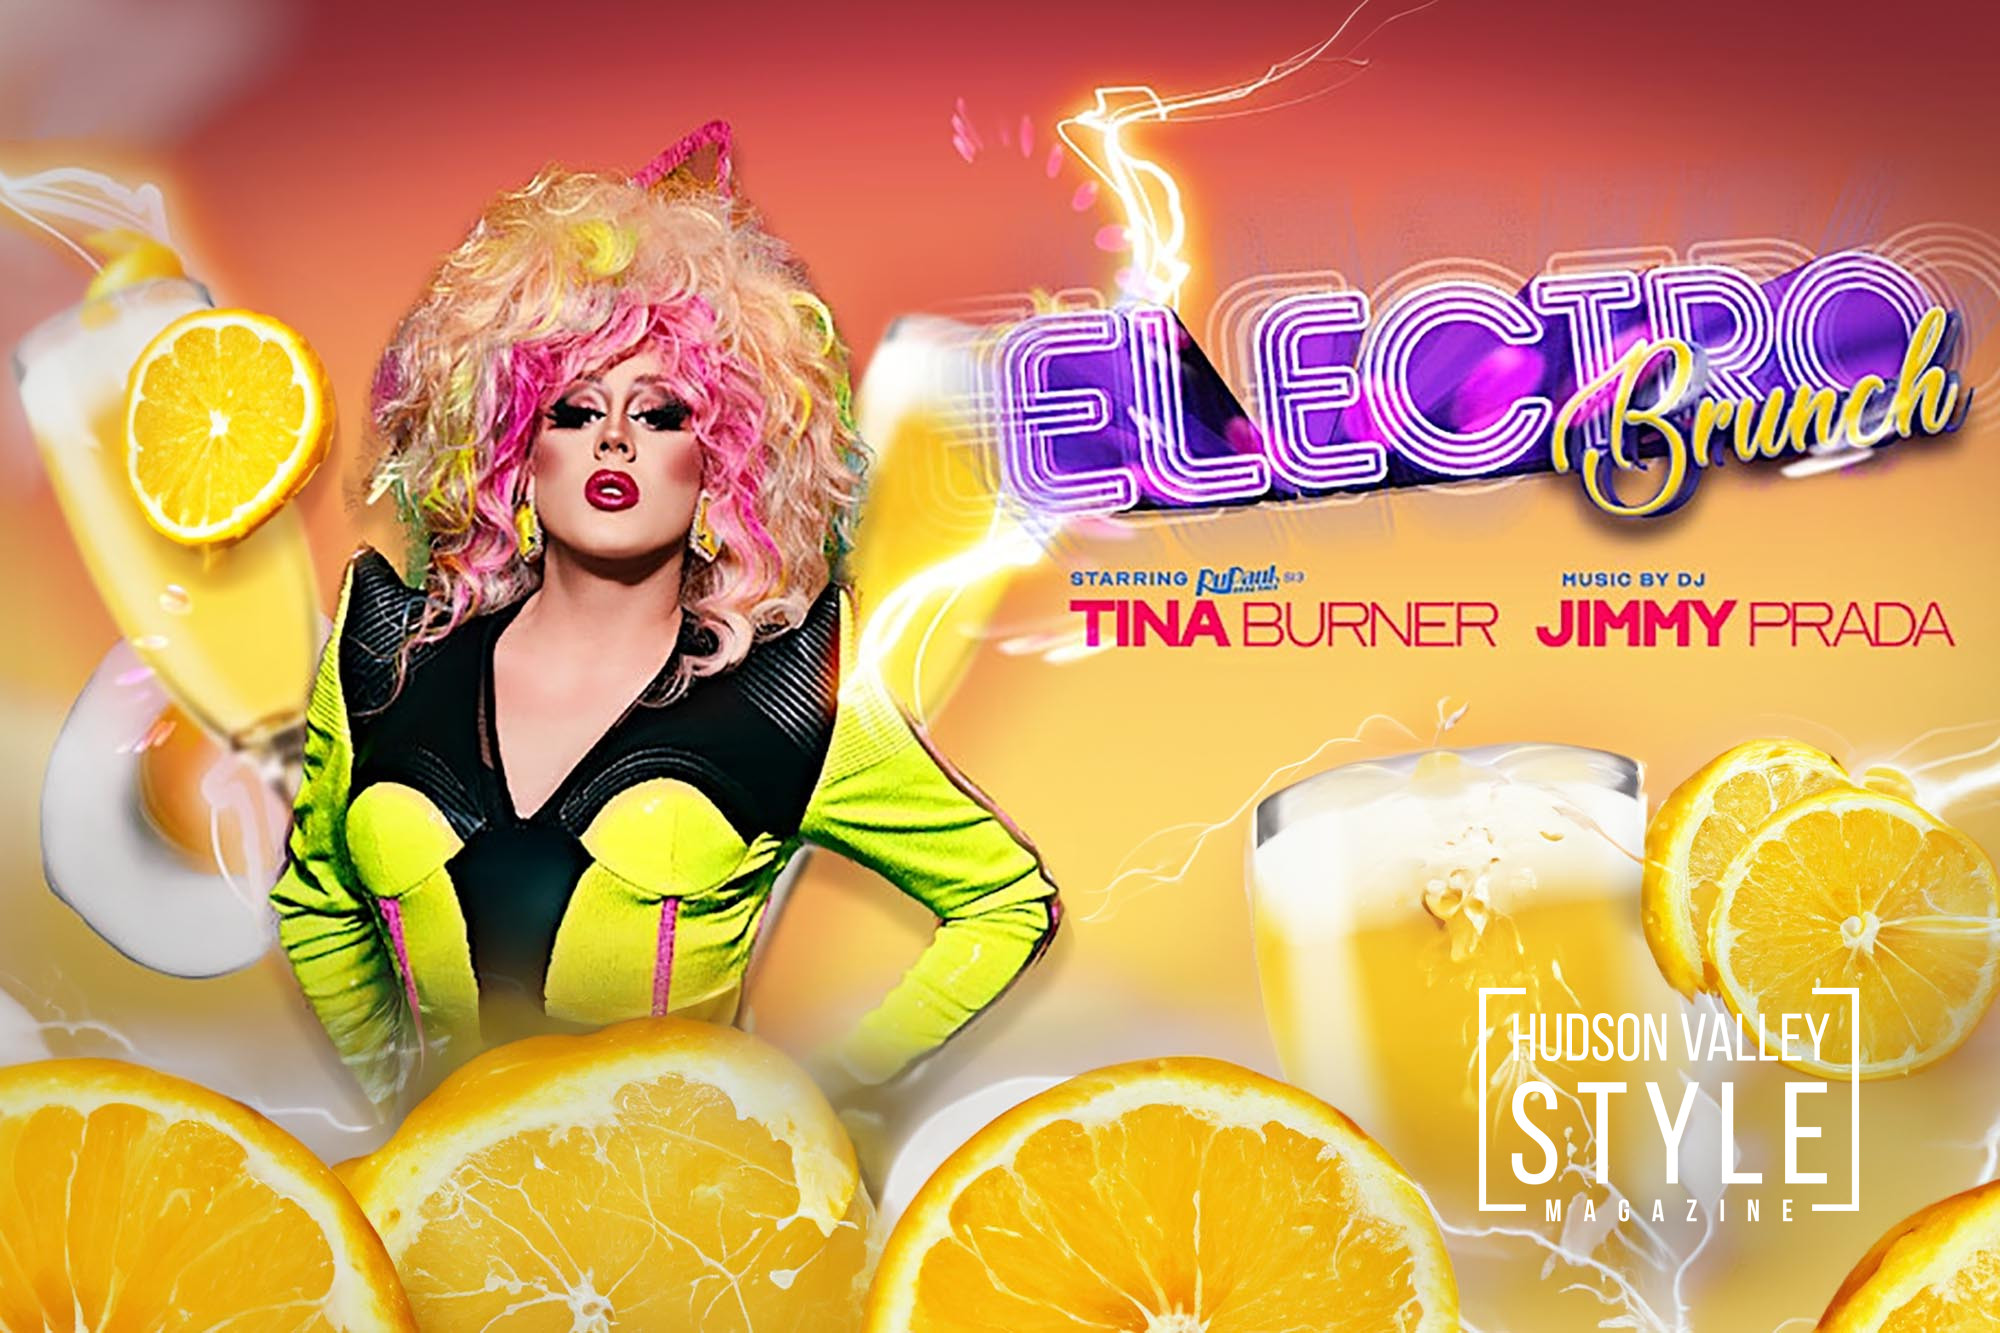 Unleash Your Inner Diva at Electro Brunch with Tina Burner This Weekend in the Hudson Valley! – Things to do in Hudson Valley – Presented by Out Loud Hudson Valley